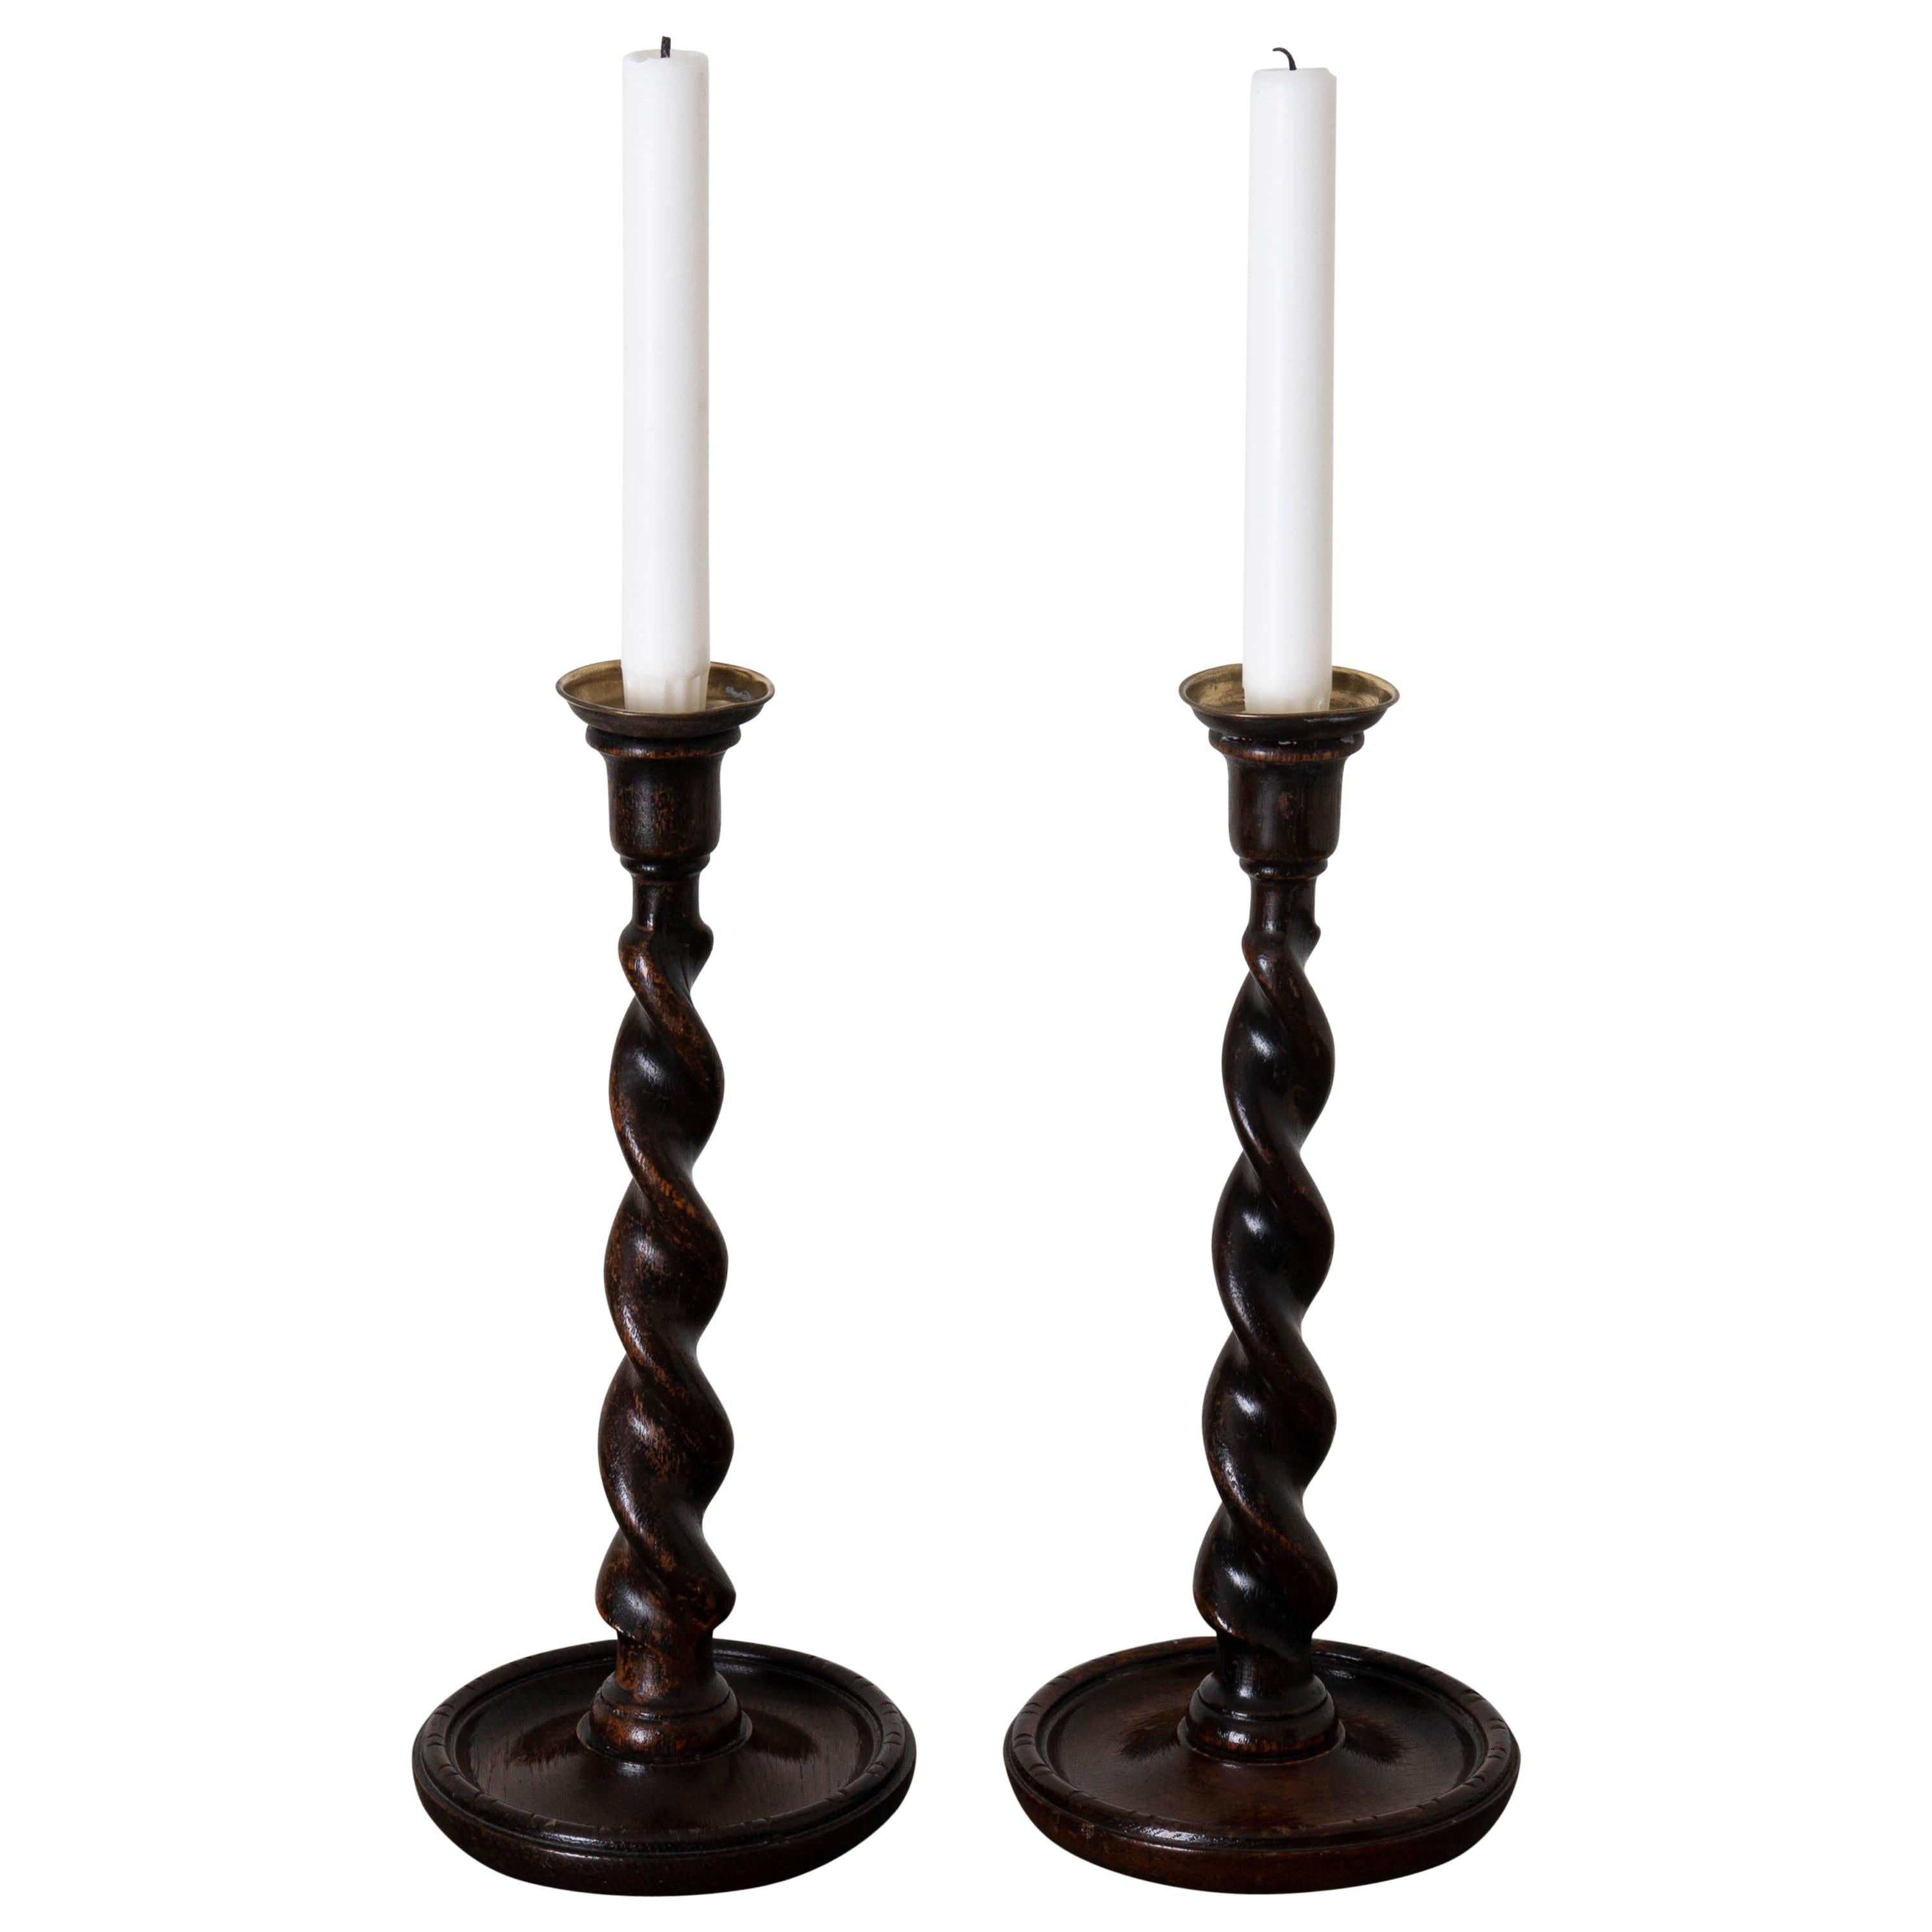 Beautifully Crafted Decor Spiral 3 Candle Holder Candle Stick 